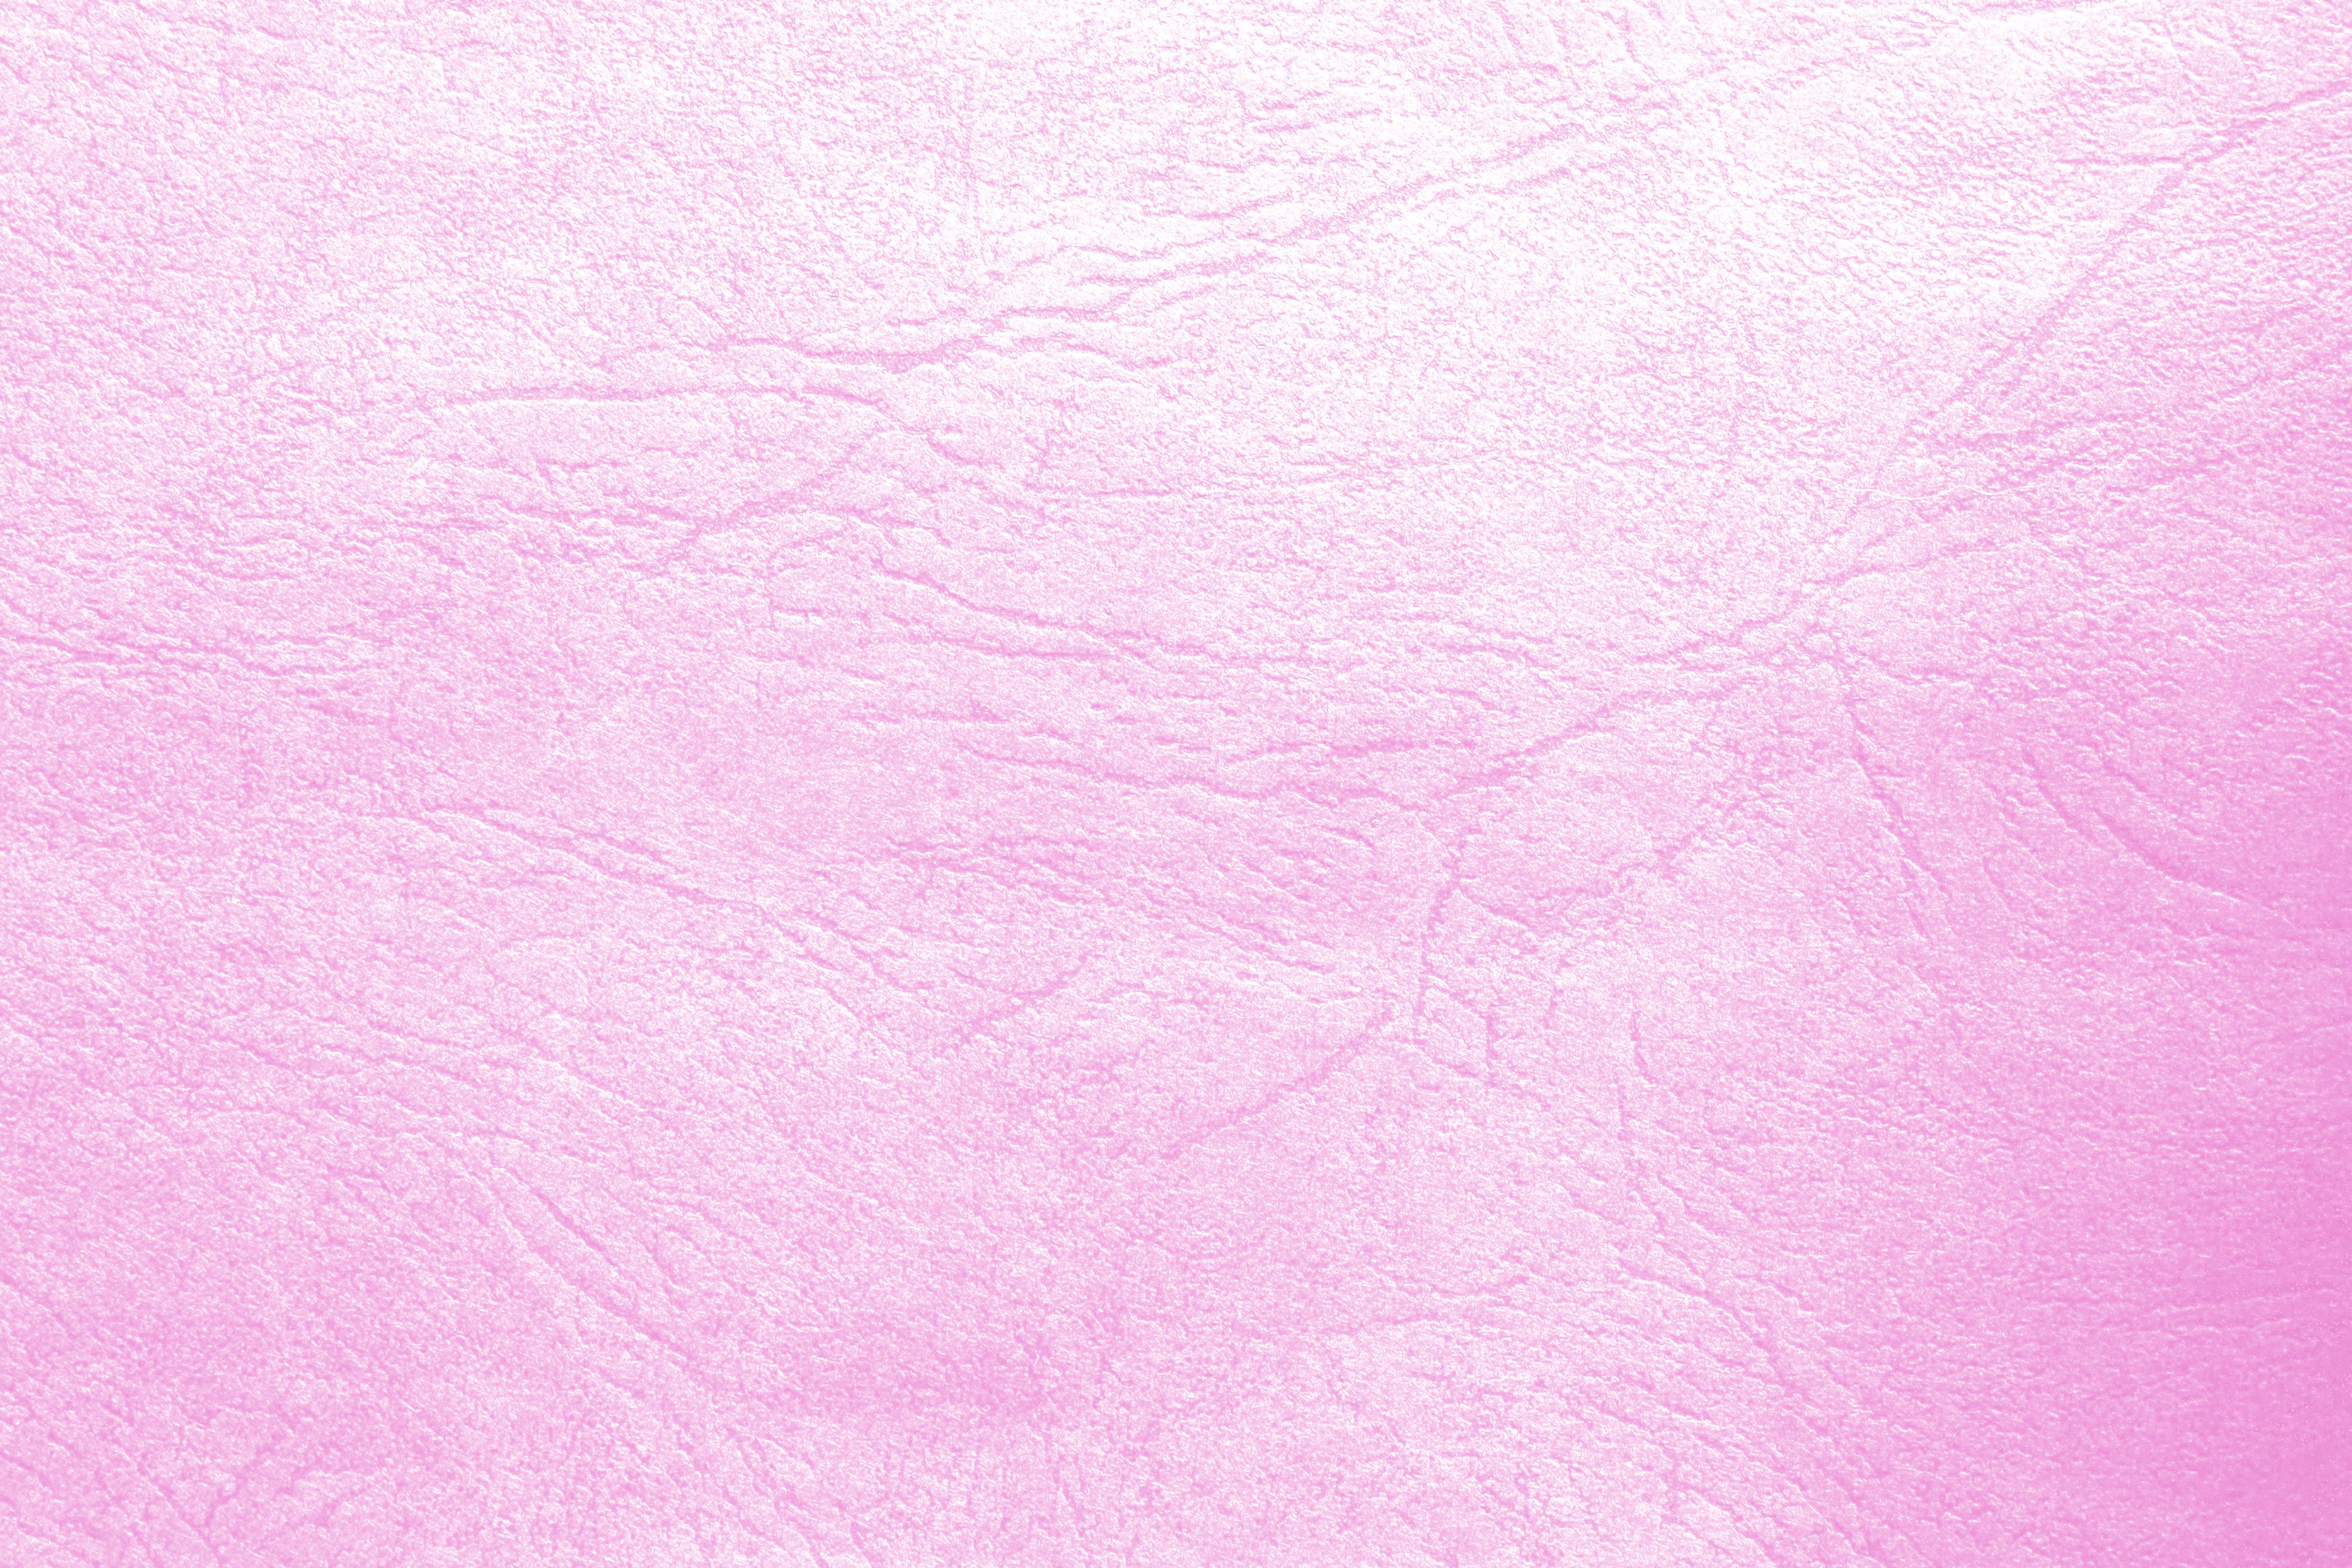 Pink Leather Texture   Free High Resolution Photo   Dimensions 3888